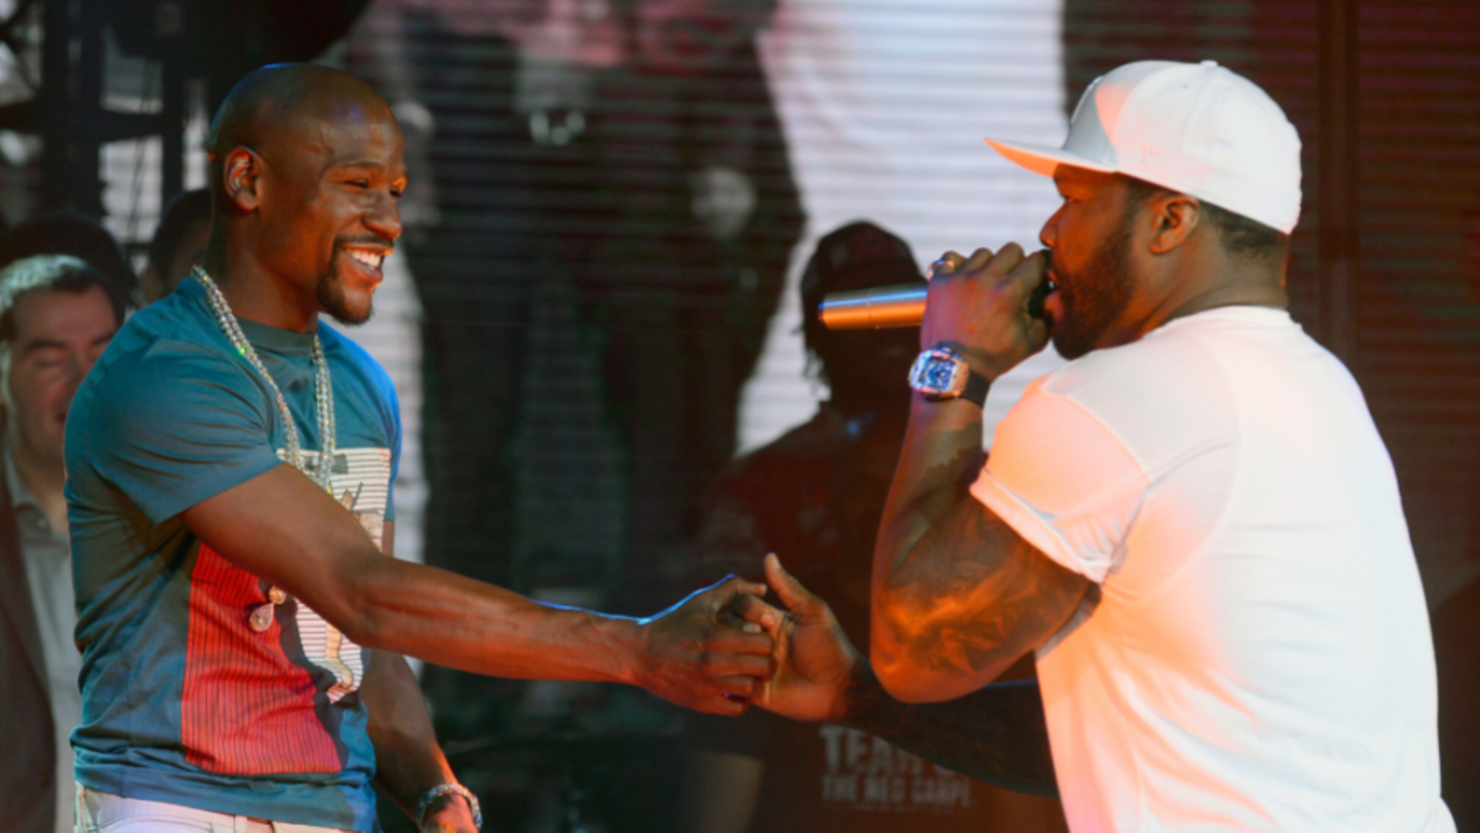 Floyd Mayweather, Jr. and 50 Cent